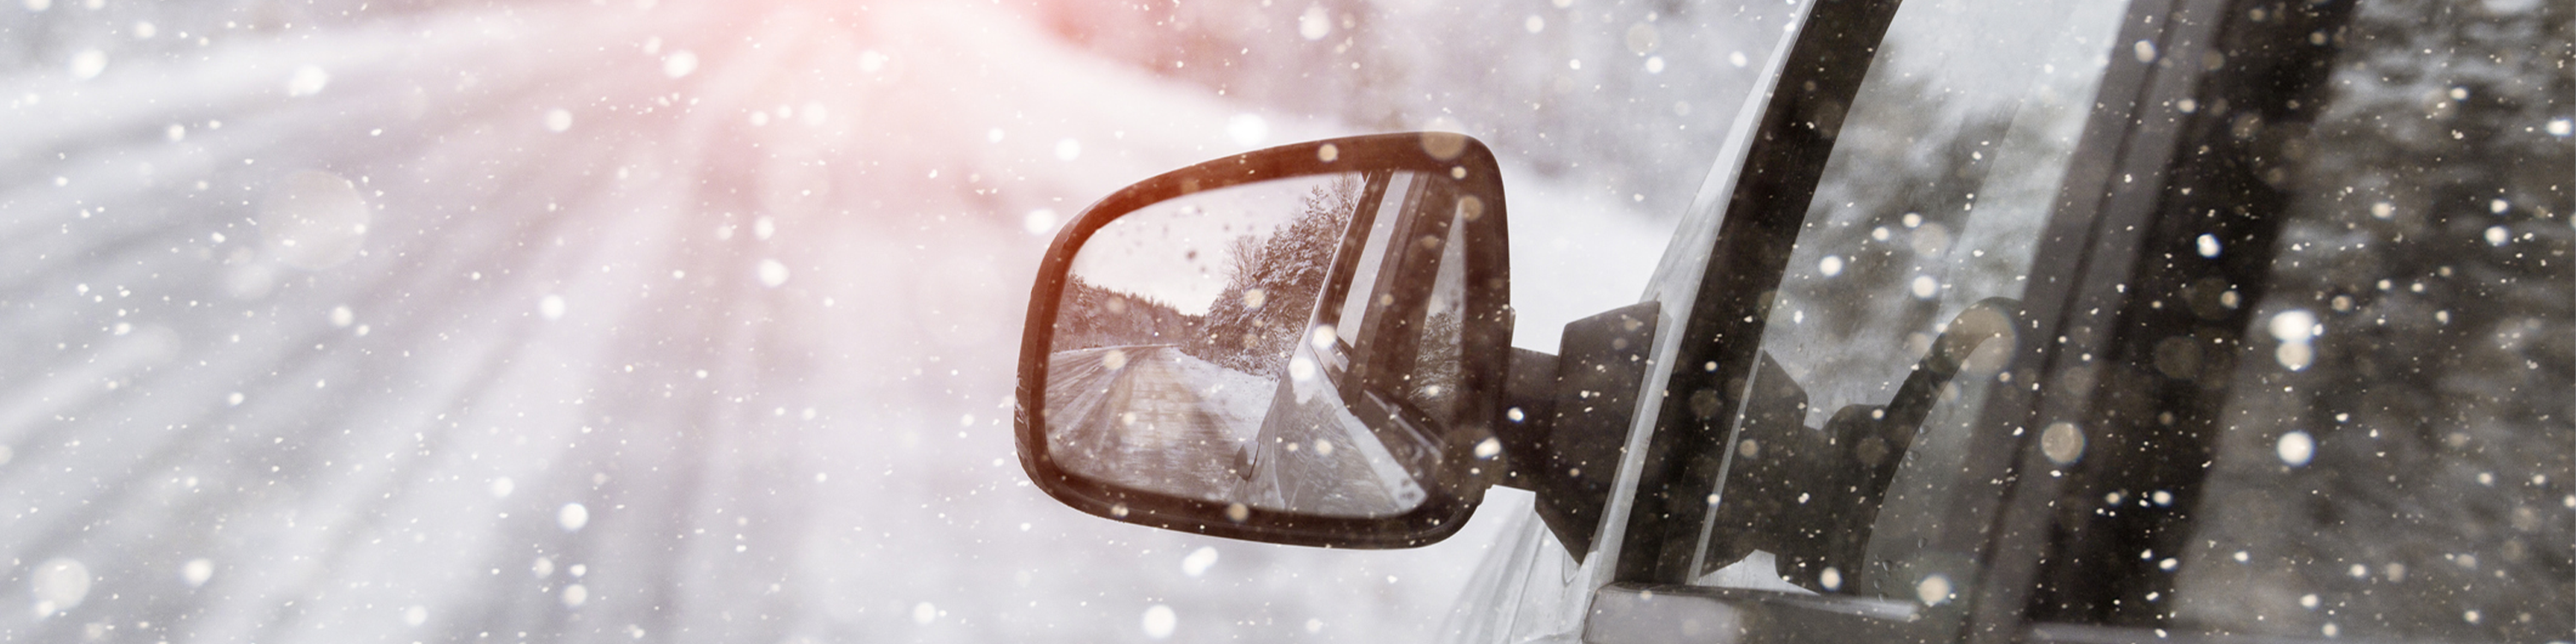 The winter road is reflected in the car's rear-view mirror